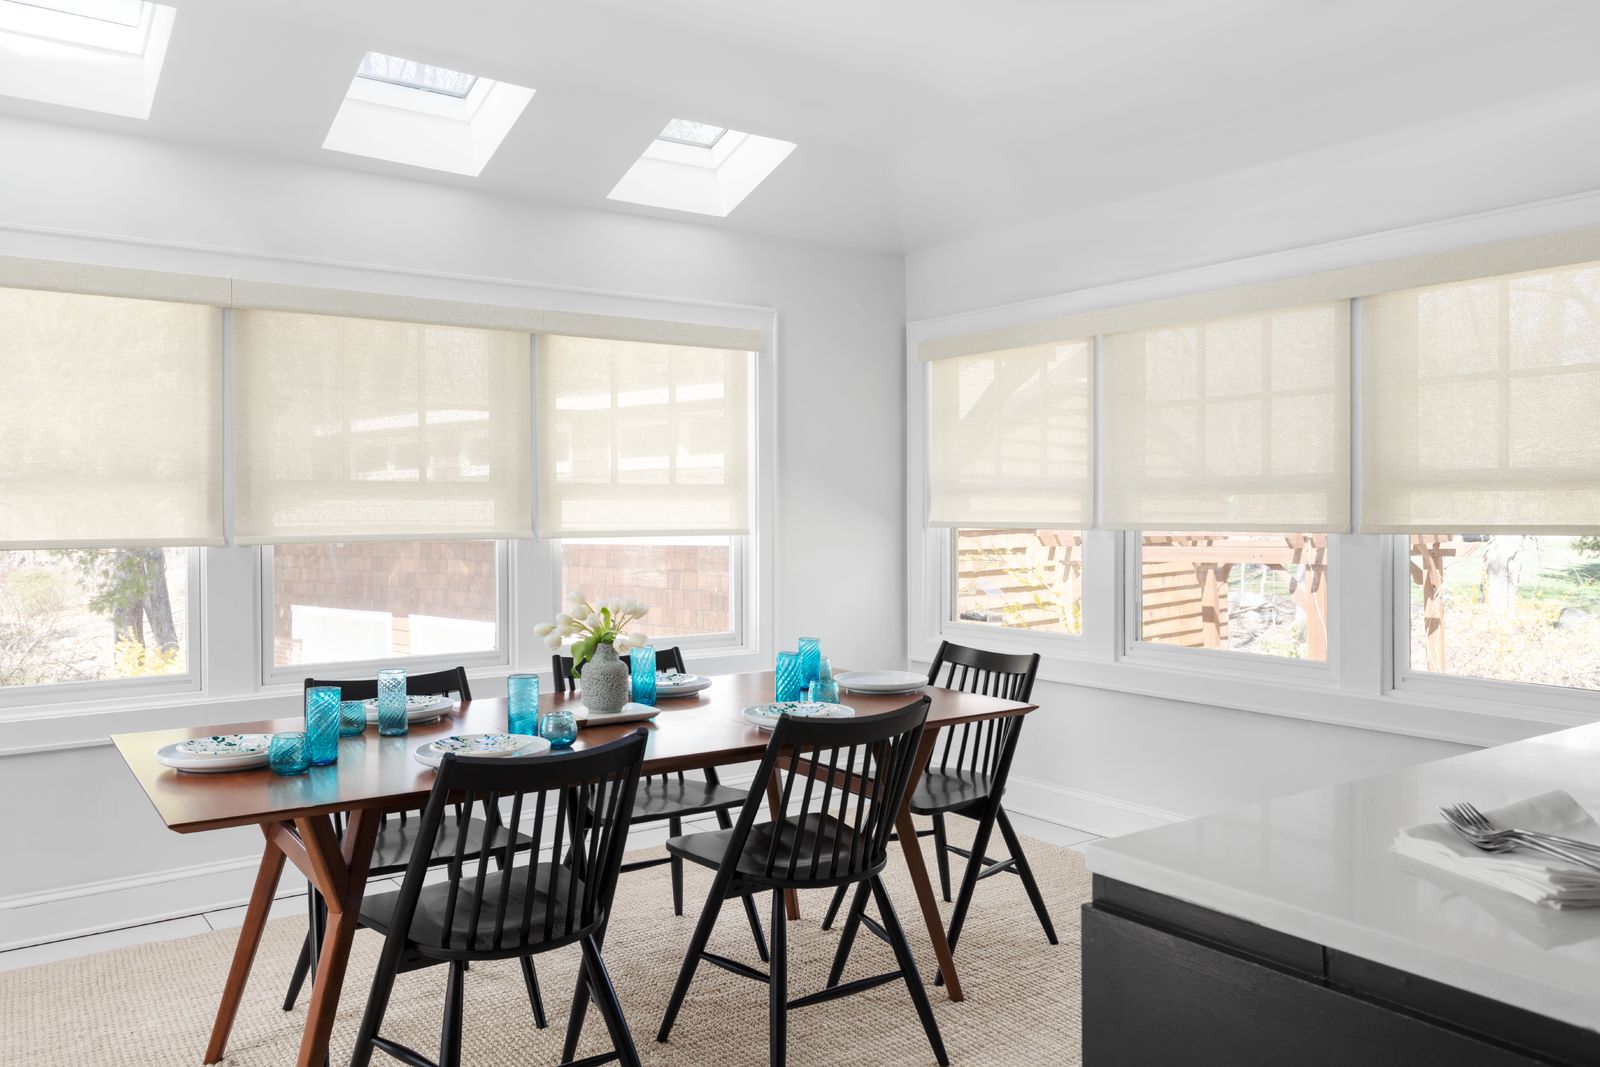 Solar shades cover six windows in a modern dining room.